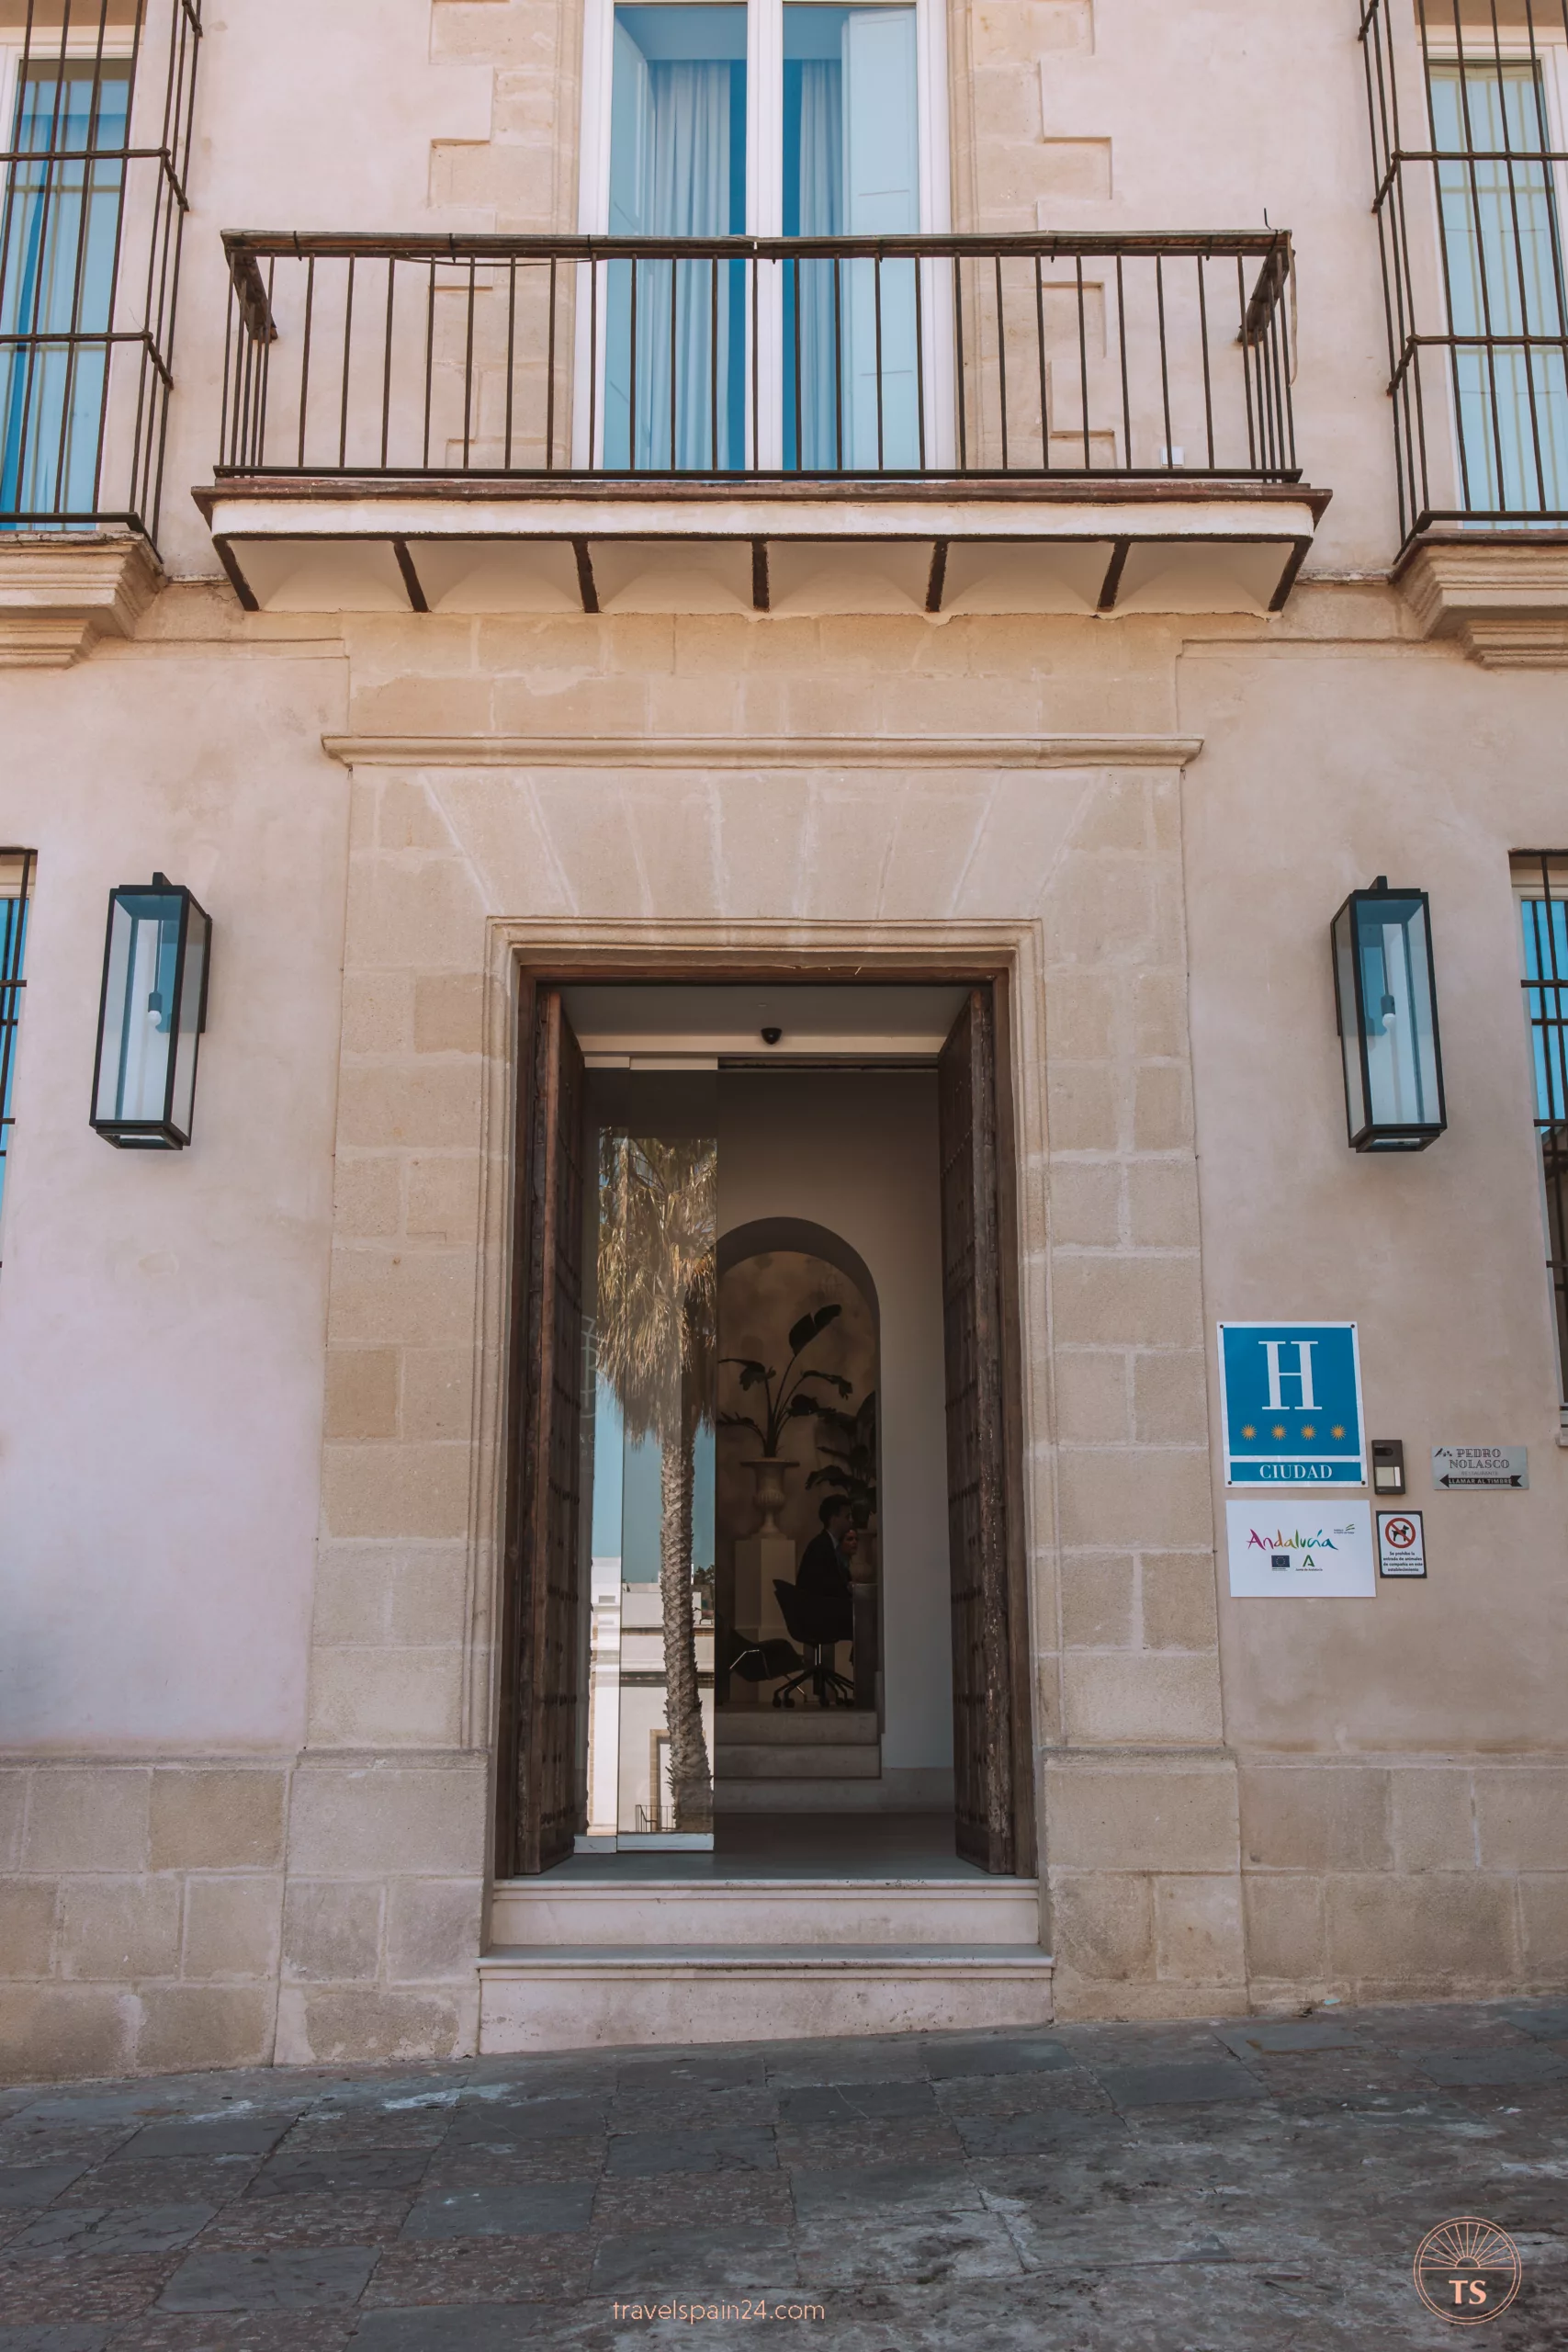 Entrance to Hotel Bodega Tio Pepe in Jerez de la Frontera, featuring the hotel's welcoming façade. This image relates to the post by highlighting one of the top accommodation options in Jerez de la Frontera.